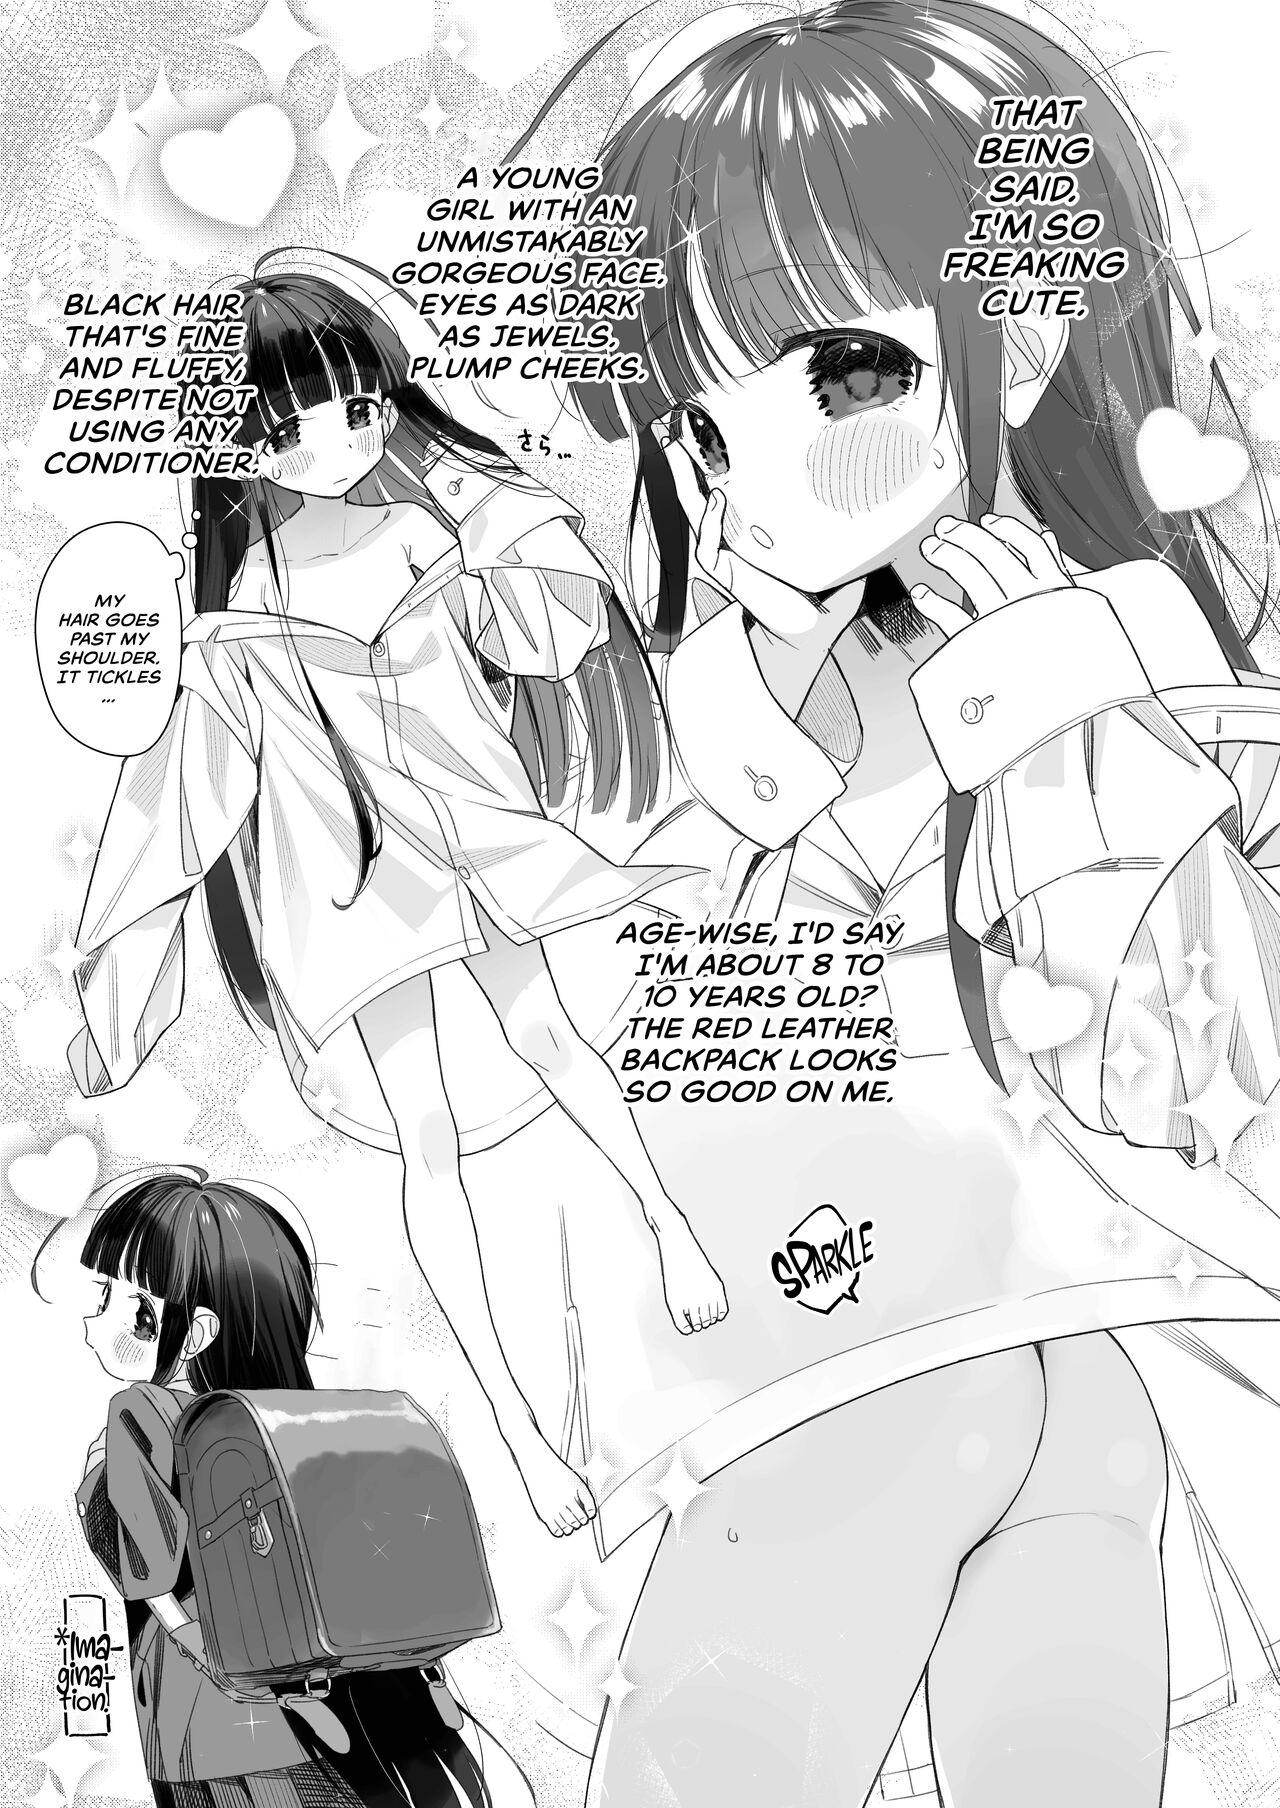 Big Boobs [Asunaro Neat. (Ronna)] TS Loli Oji-san no Bouken Onanie Hen | The Adventures of an Old Man Who Was Gender-Swapped Into a Loli ~Masturbation Chapter~ [English] [CulturedCommissions] [Digital] - Original Girl Gets Fucked - Page 6